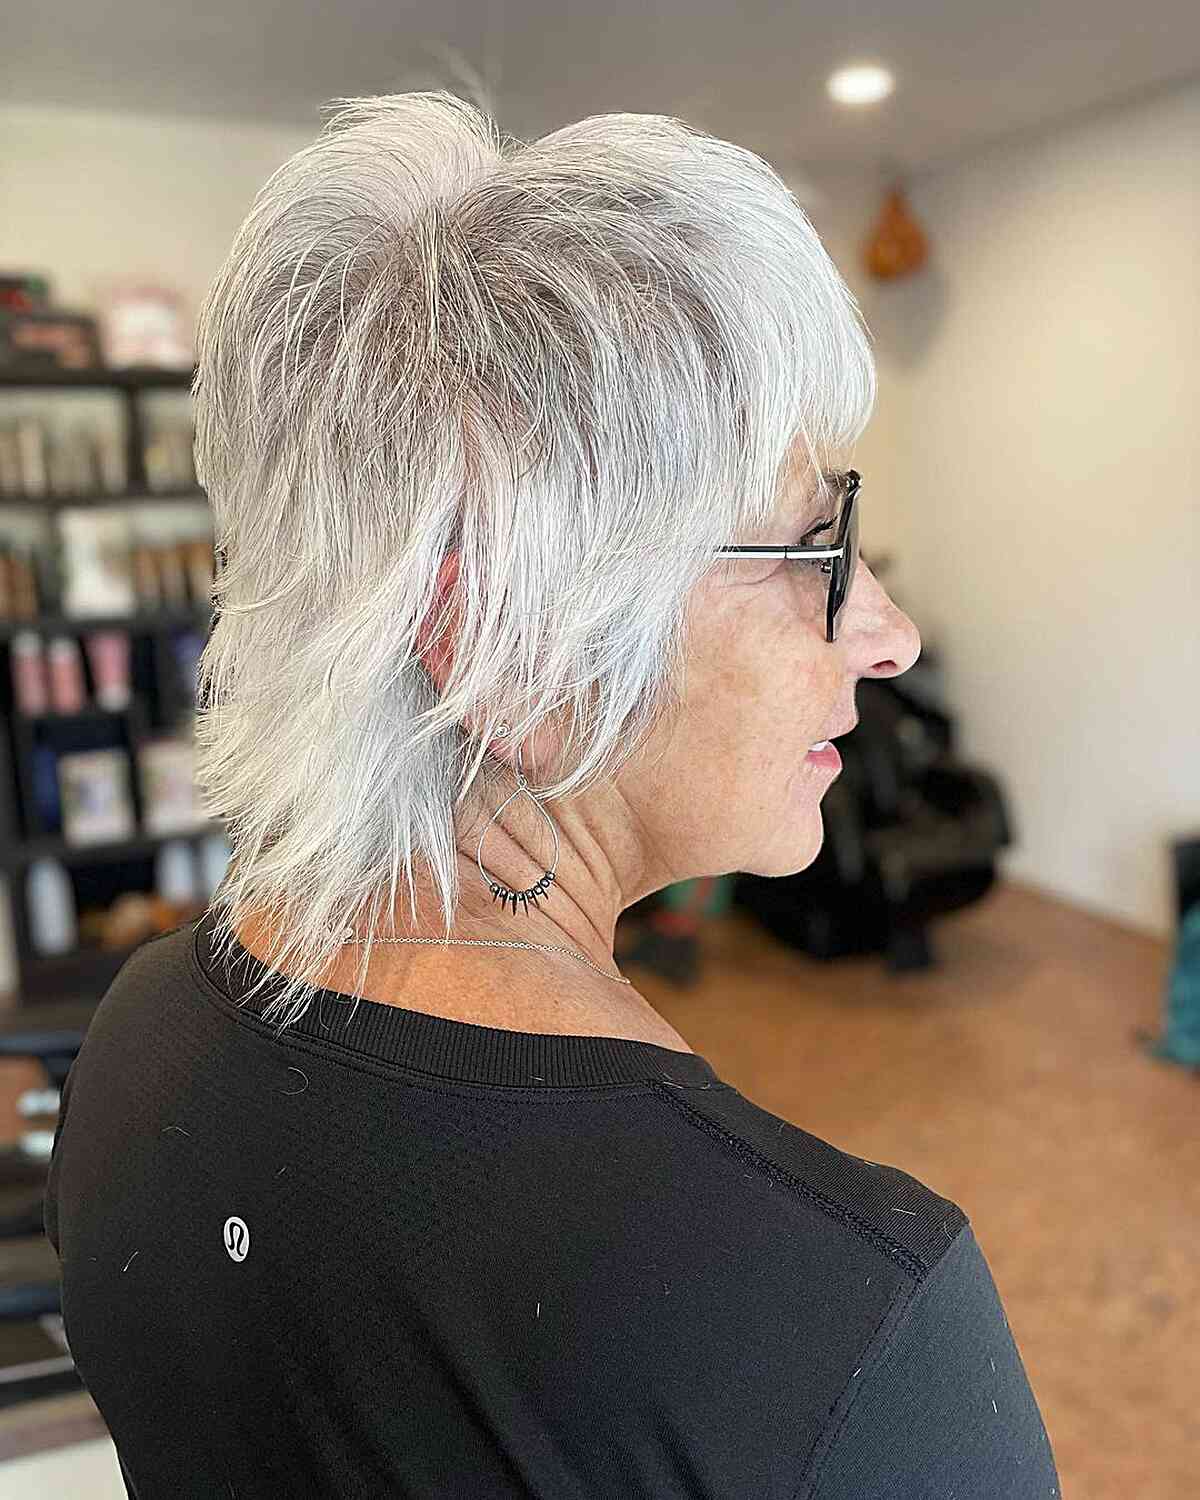 Very Short Shaggy Wolf Cut with Choppy Bangs on Older Women Aged 60 with Glasses